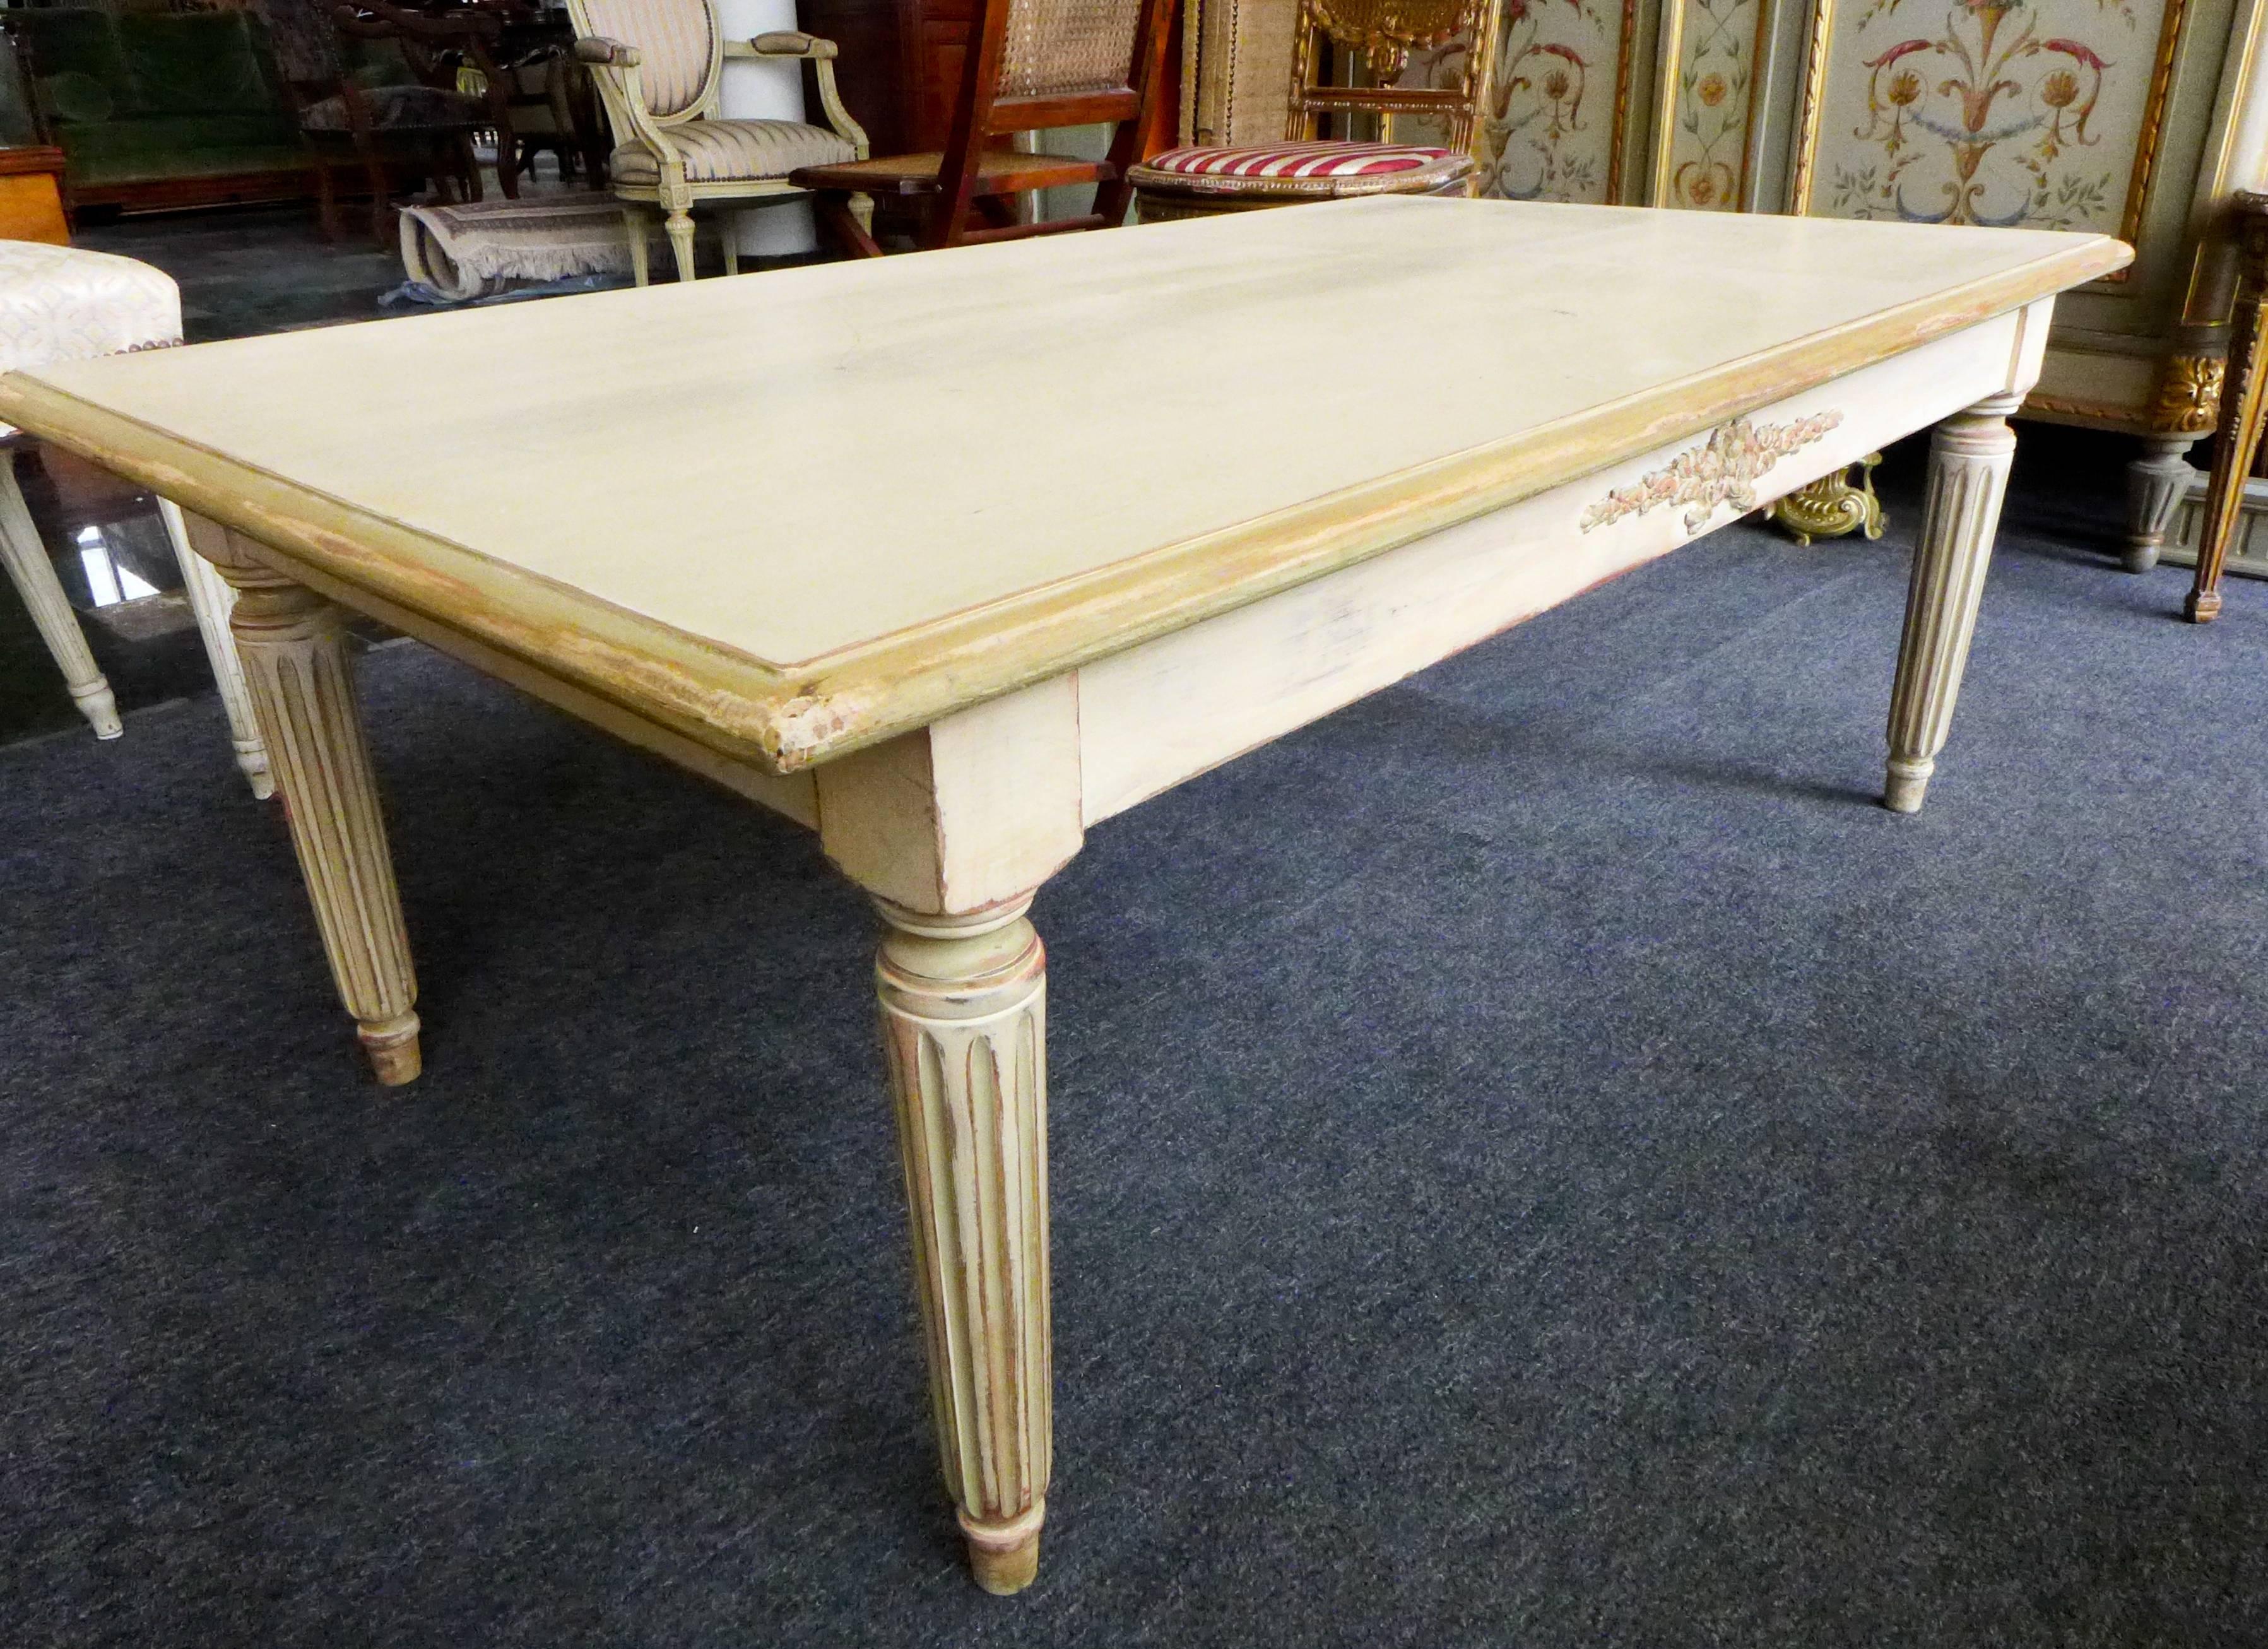 Exceptional 19th century hand painted Louis XVI solid wood table, circa 1860. Elegant legs with a typical ribbon on the both sides. Painted in light beige-green with a nice antique finish.